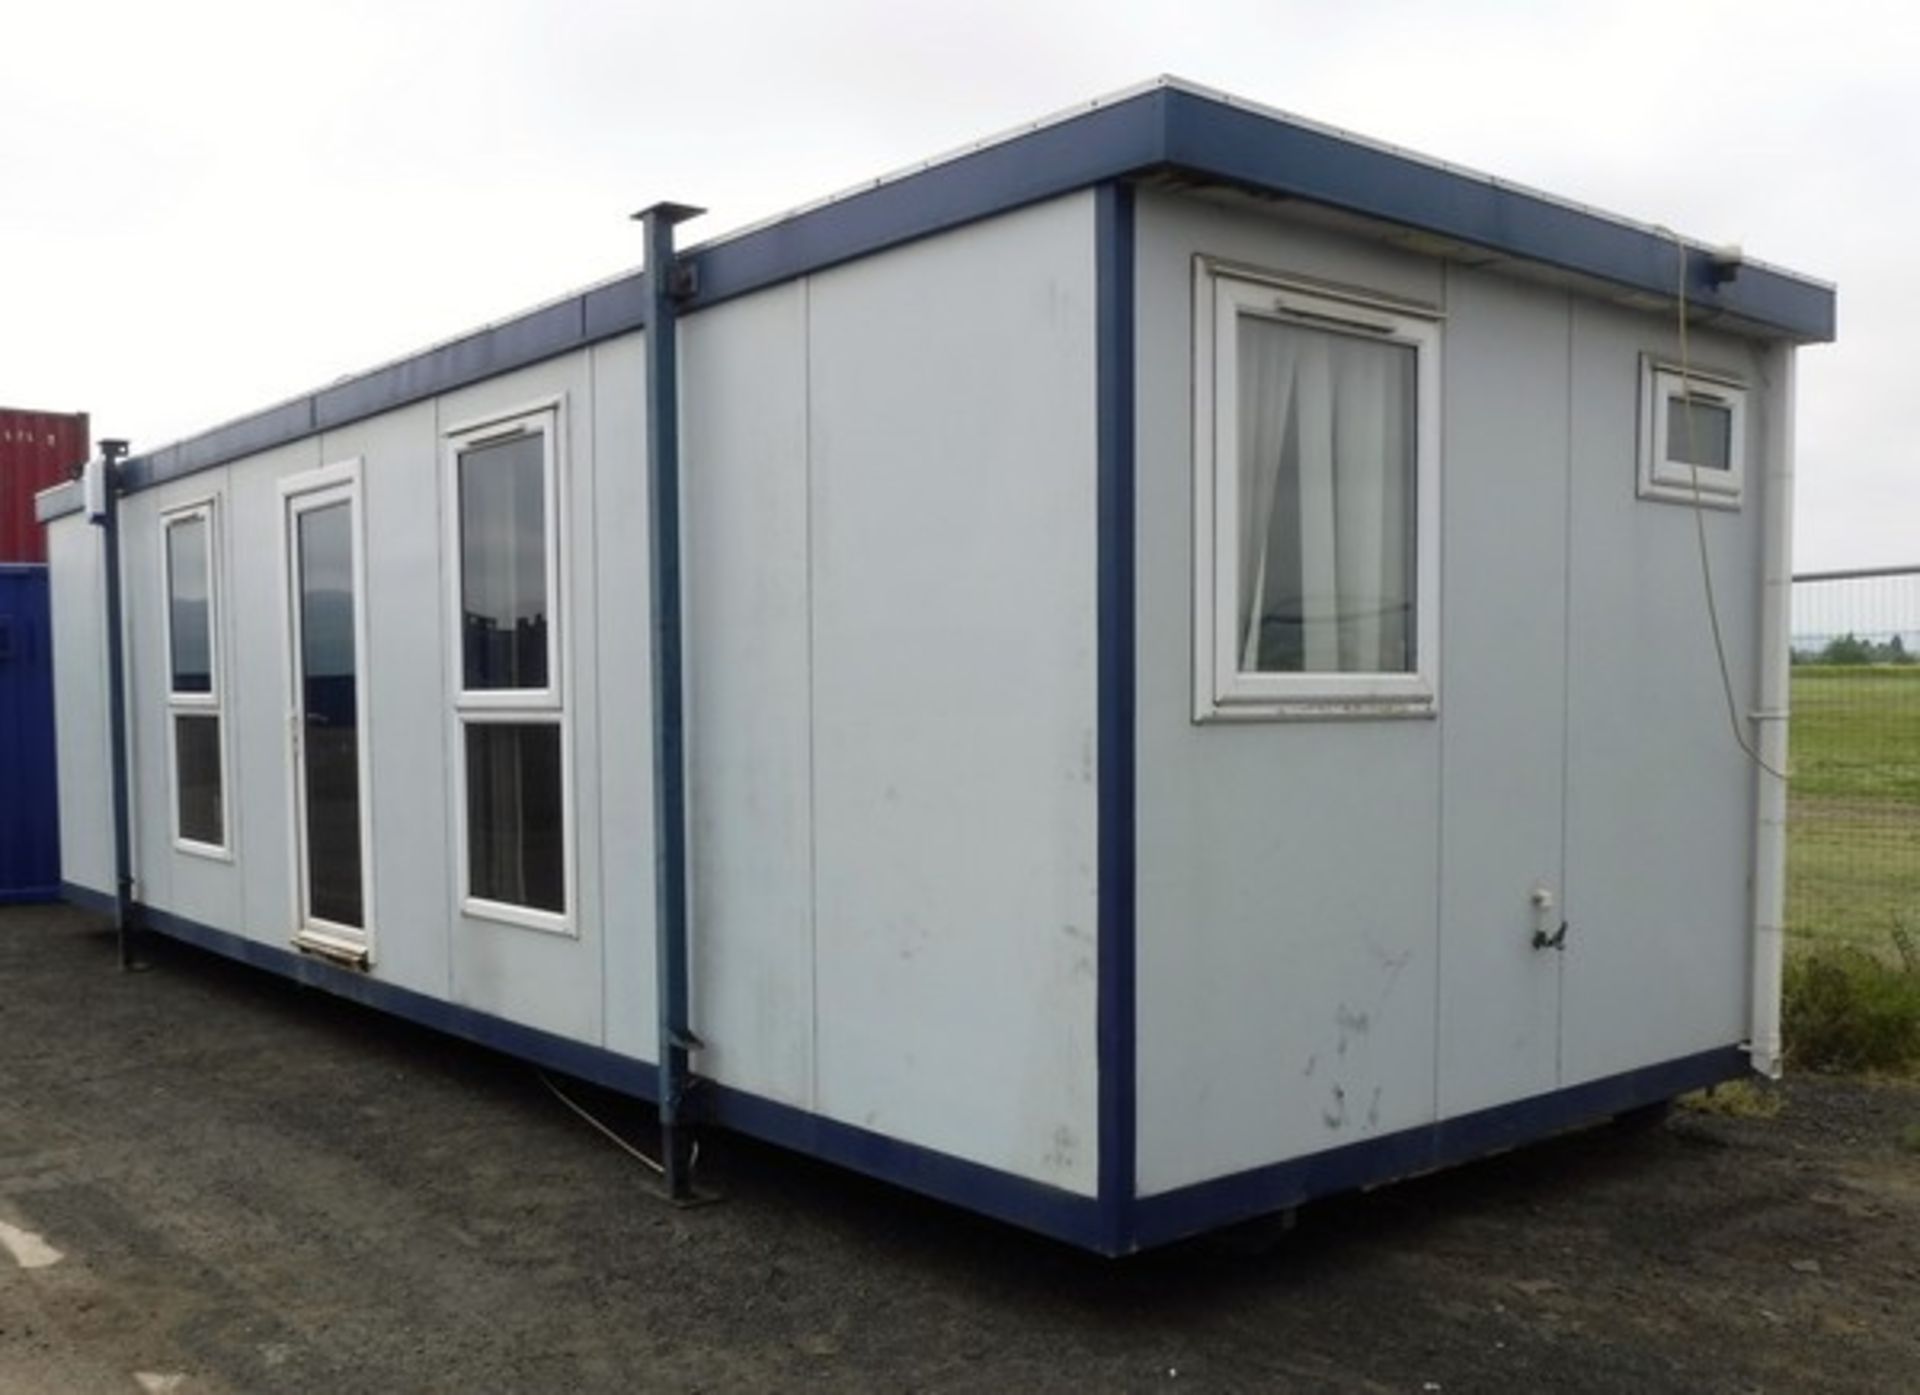 2007 PORTABLE BUILDING. 10m x 3.1m with toilet & kitchen. Double glazed, alarm fitted, insulated.